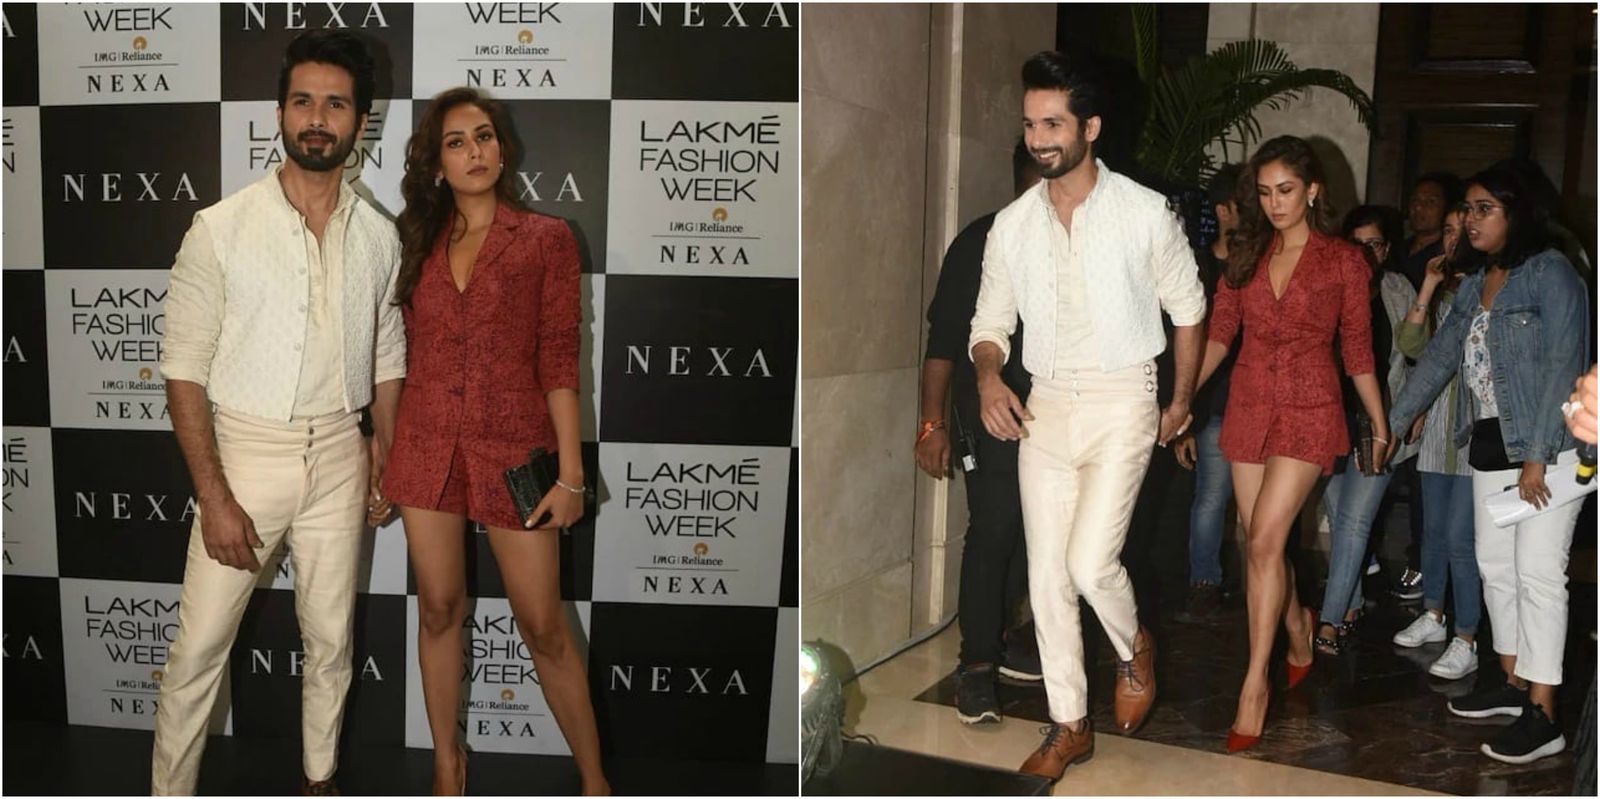 LFW 2019: Shahid Kapoor And Mira Rajput Looks Dapper As They Attend Kunal Rawal’s Fashion Show